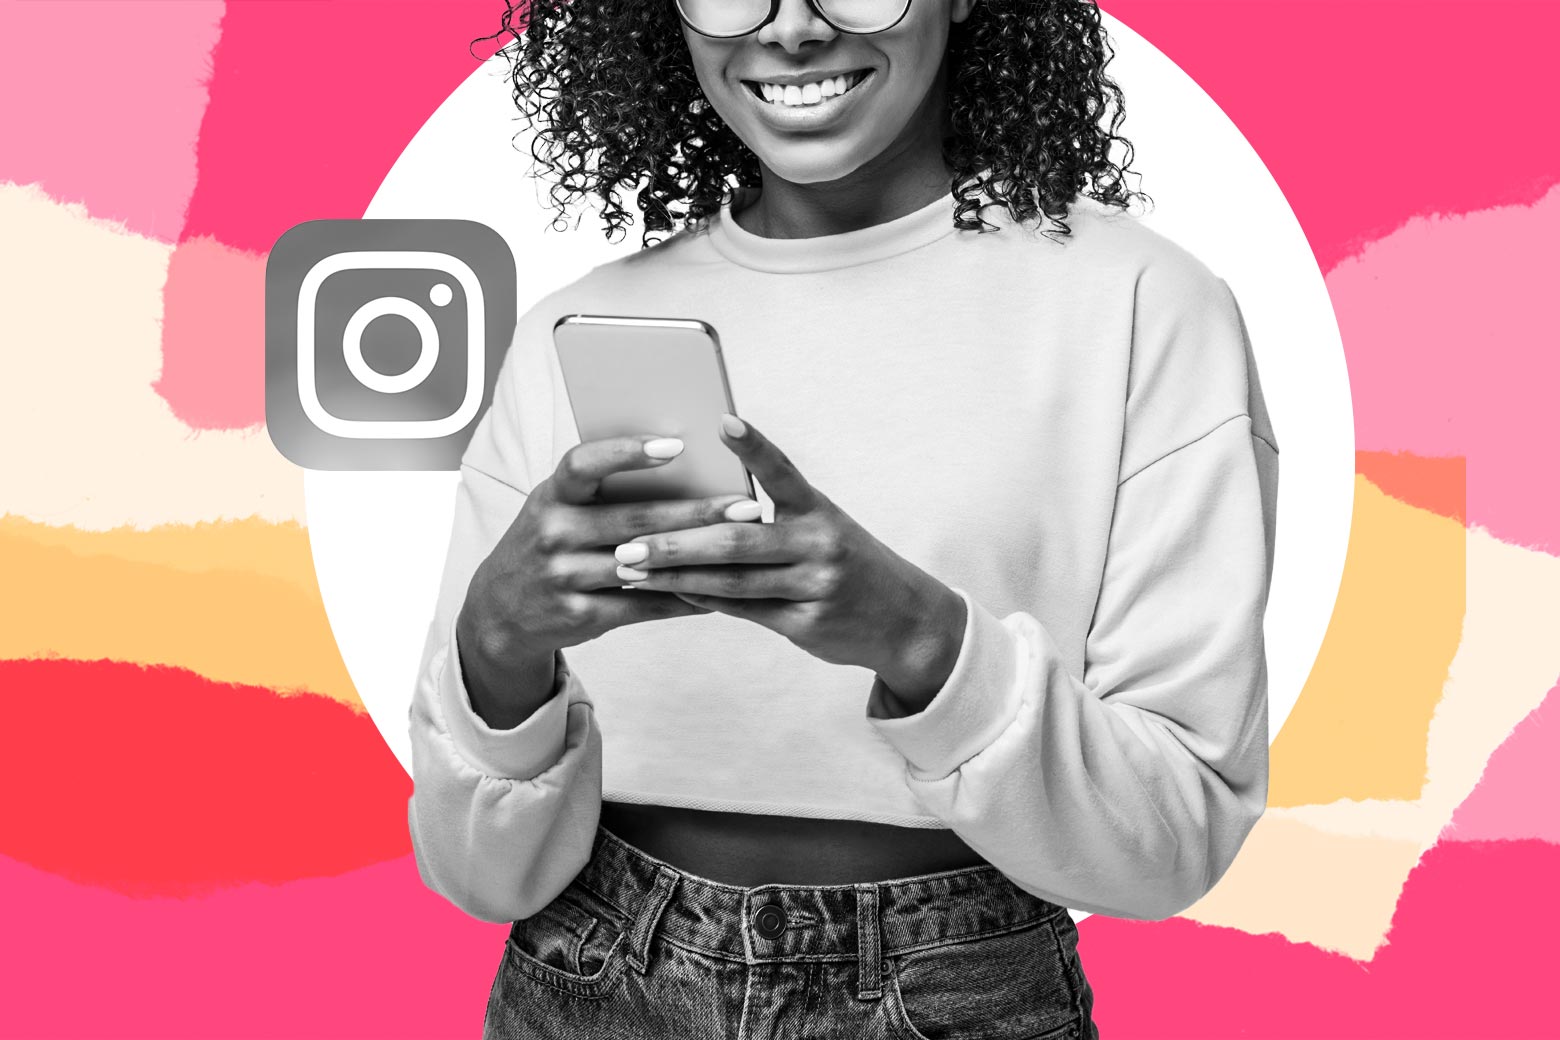 A girl holds a phone. The Instagram logo appears behind her.